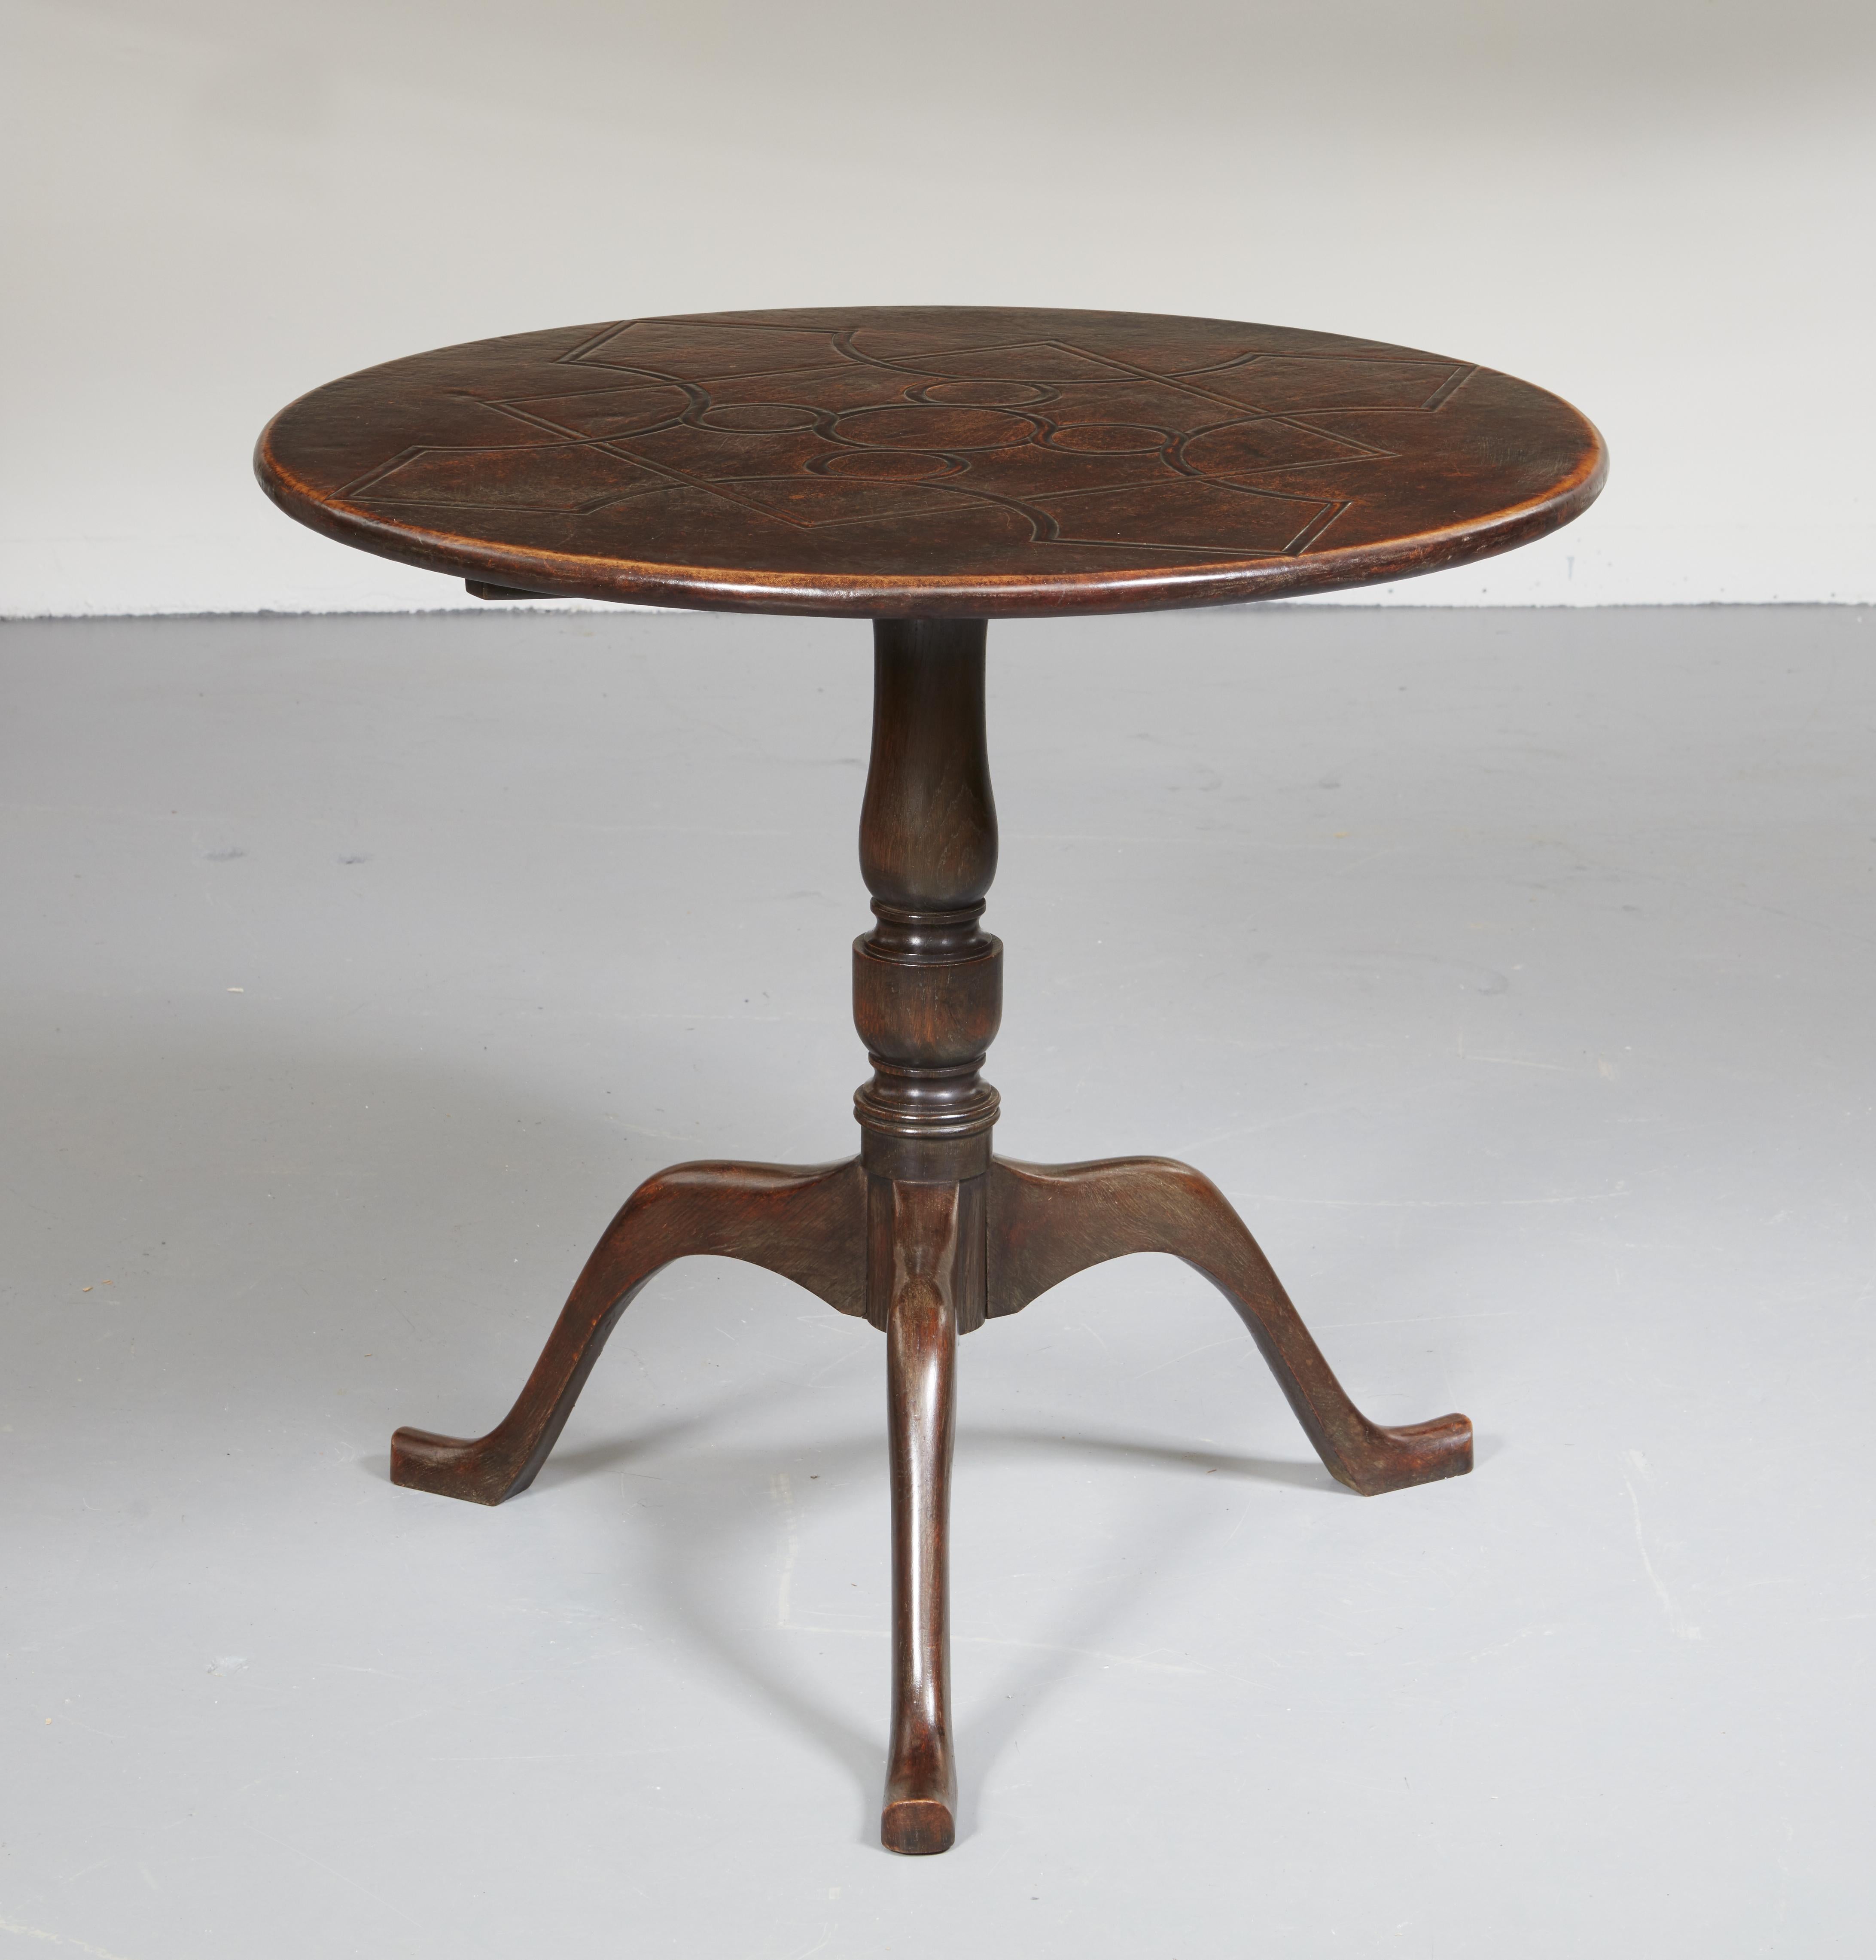 A very unusual English leather clad round tripod table with geometric worked decoration to leather top, tilt action swivel, balustrade shaft and standing on tripod legs with humanoid knees and feet in a stylized Manx manner.